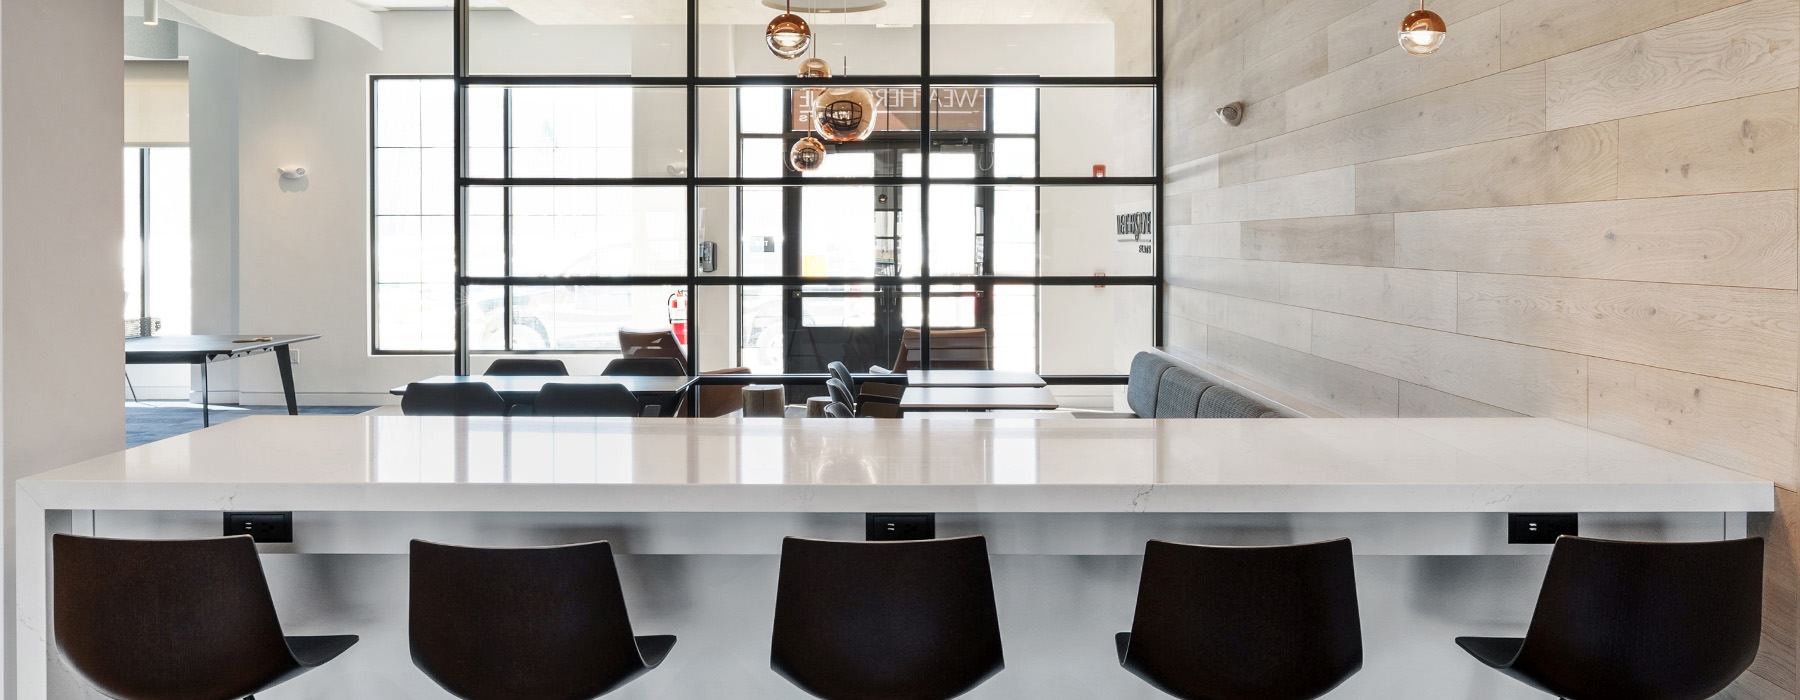 Workspace with multiple areas for seating natural lighting